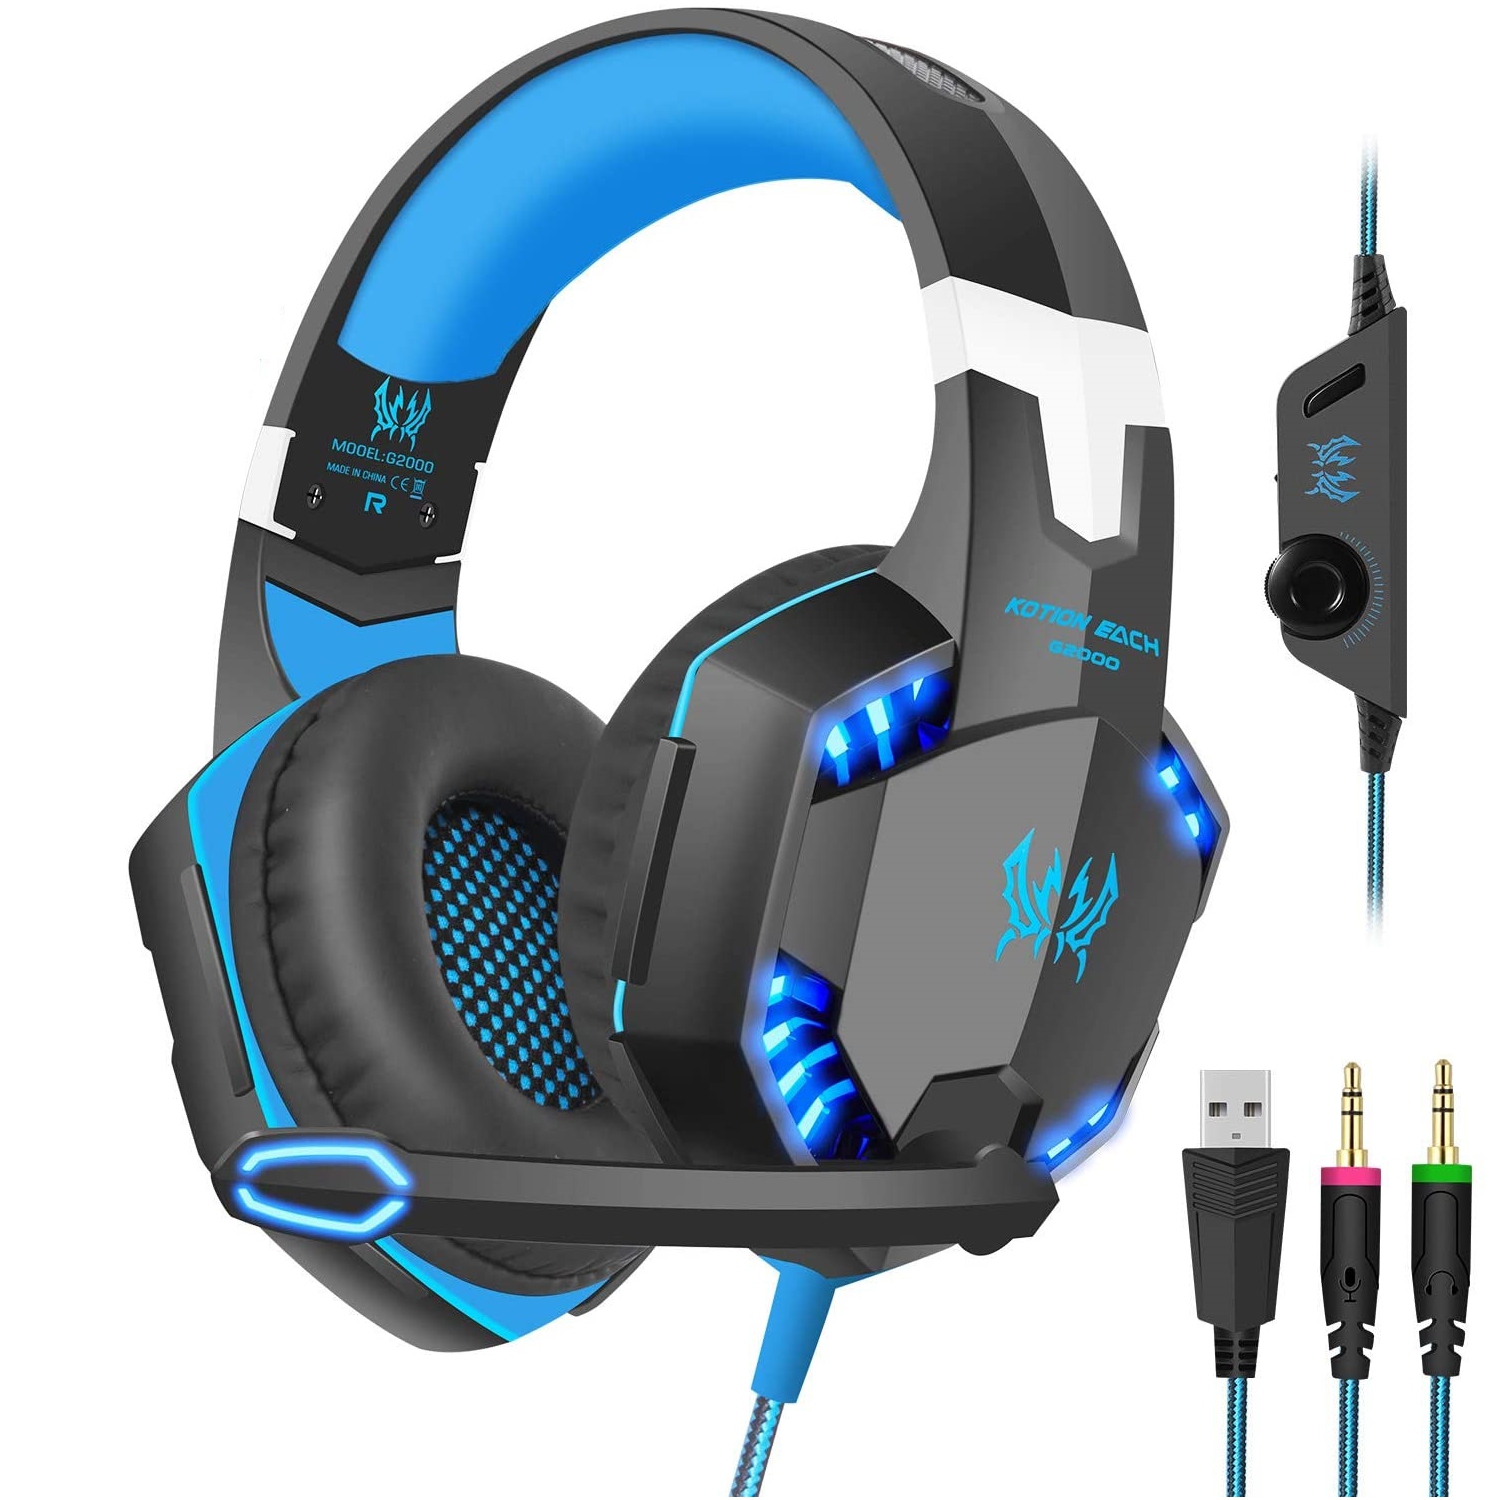 ISTAR Gaming Headset with Mic for PC,PS4,Xbox One,Over-Ear Headphones with Volume Control LED Light Cool Style Stereo,Noise Reduction for Laptops,Smartphone,Computer (Black & Blue)